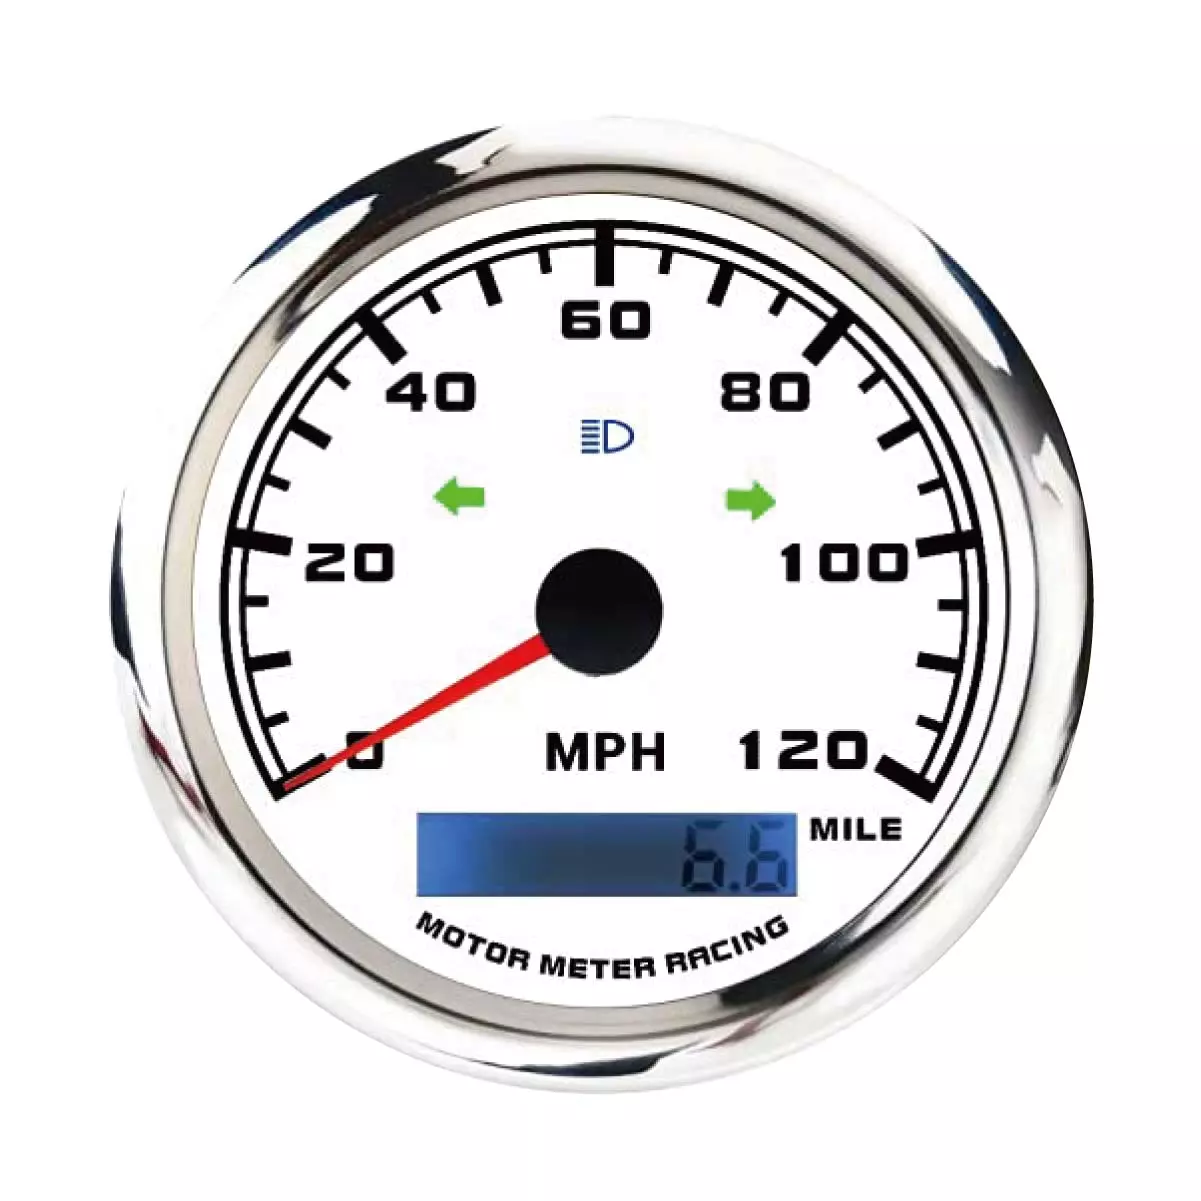 MOTOR METER RACING W Pro Tachometer 8000 RPM Programmable Waterproof White Dial Red LED 